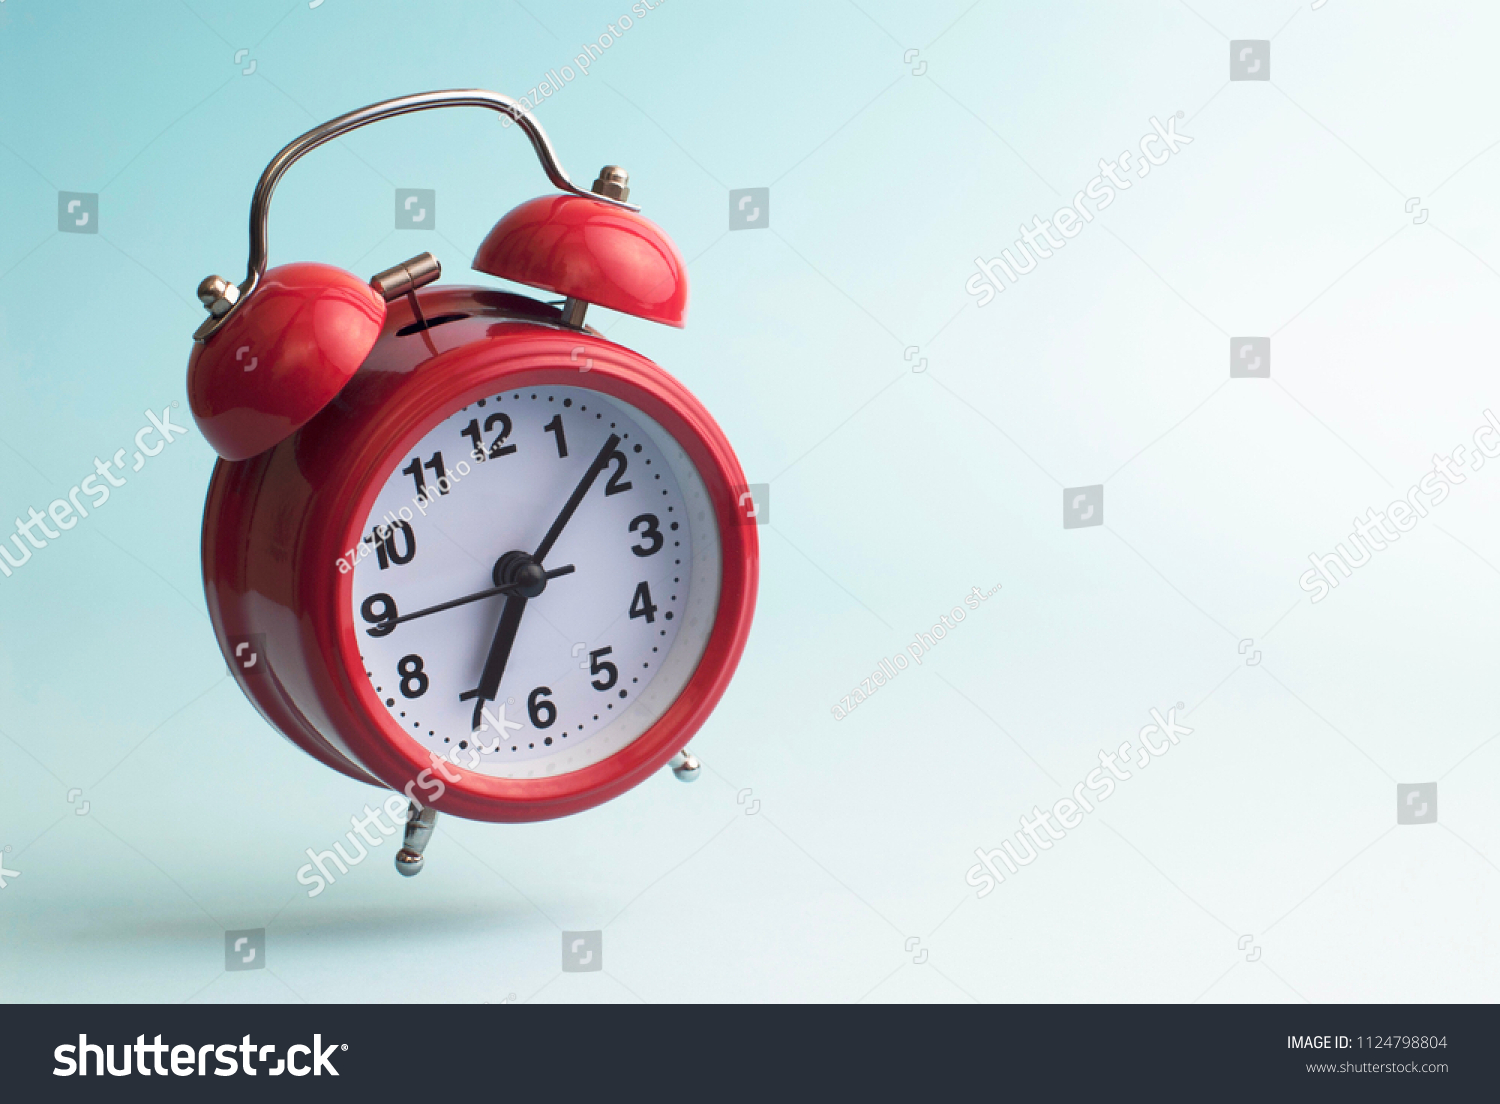 Red alarm clock. Flying alarm clock. Red alarm clock on a blue background. #1124798804